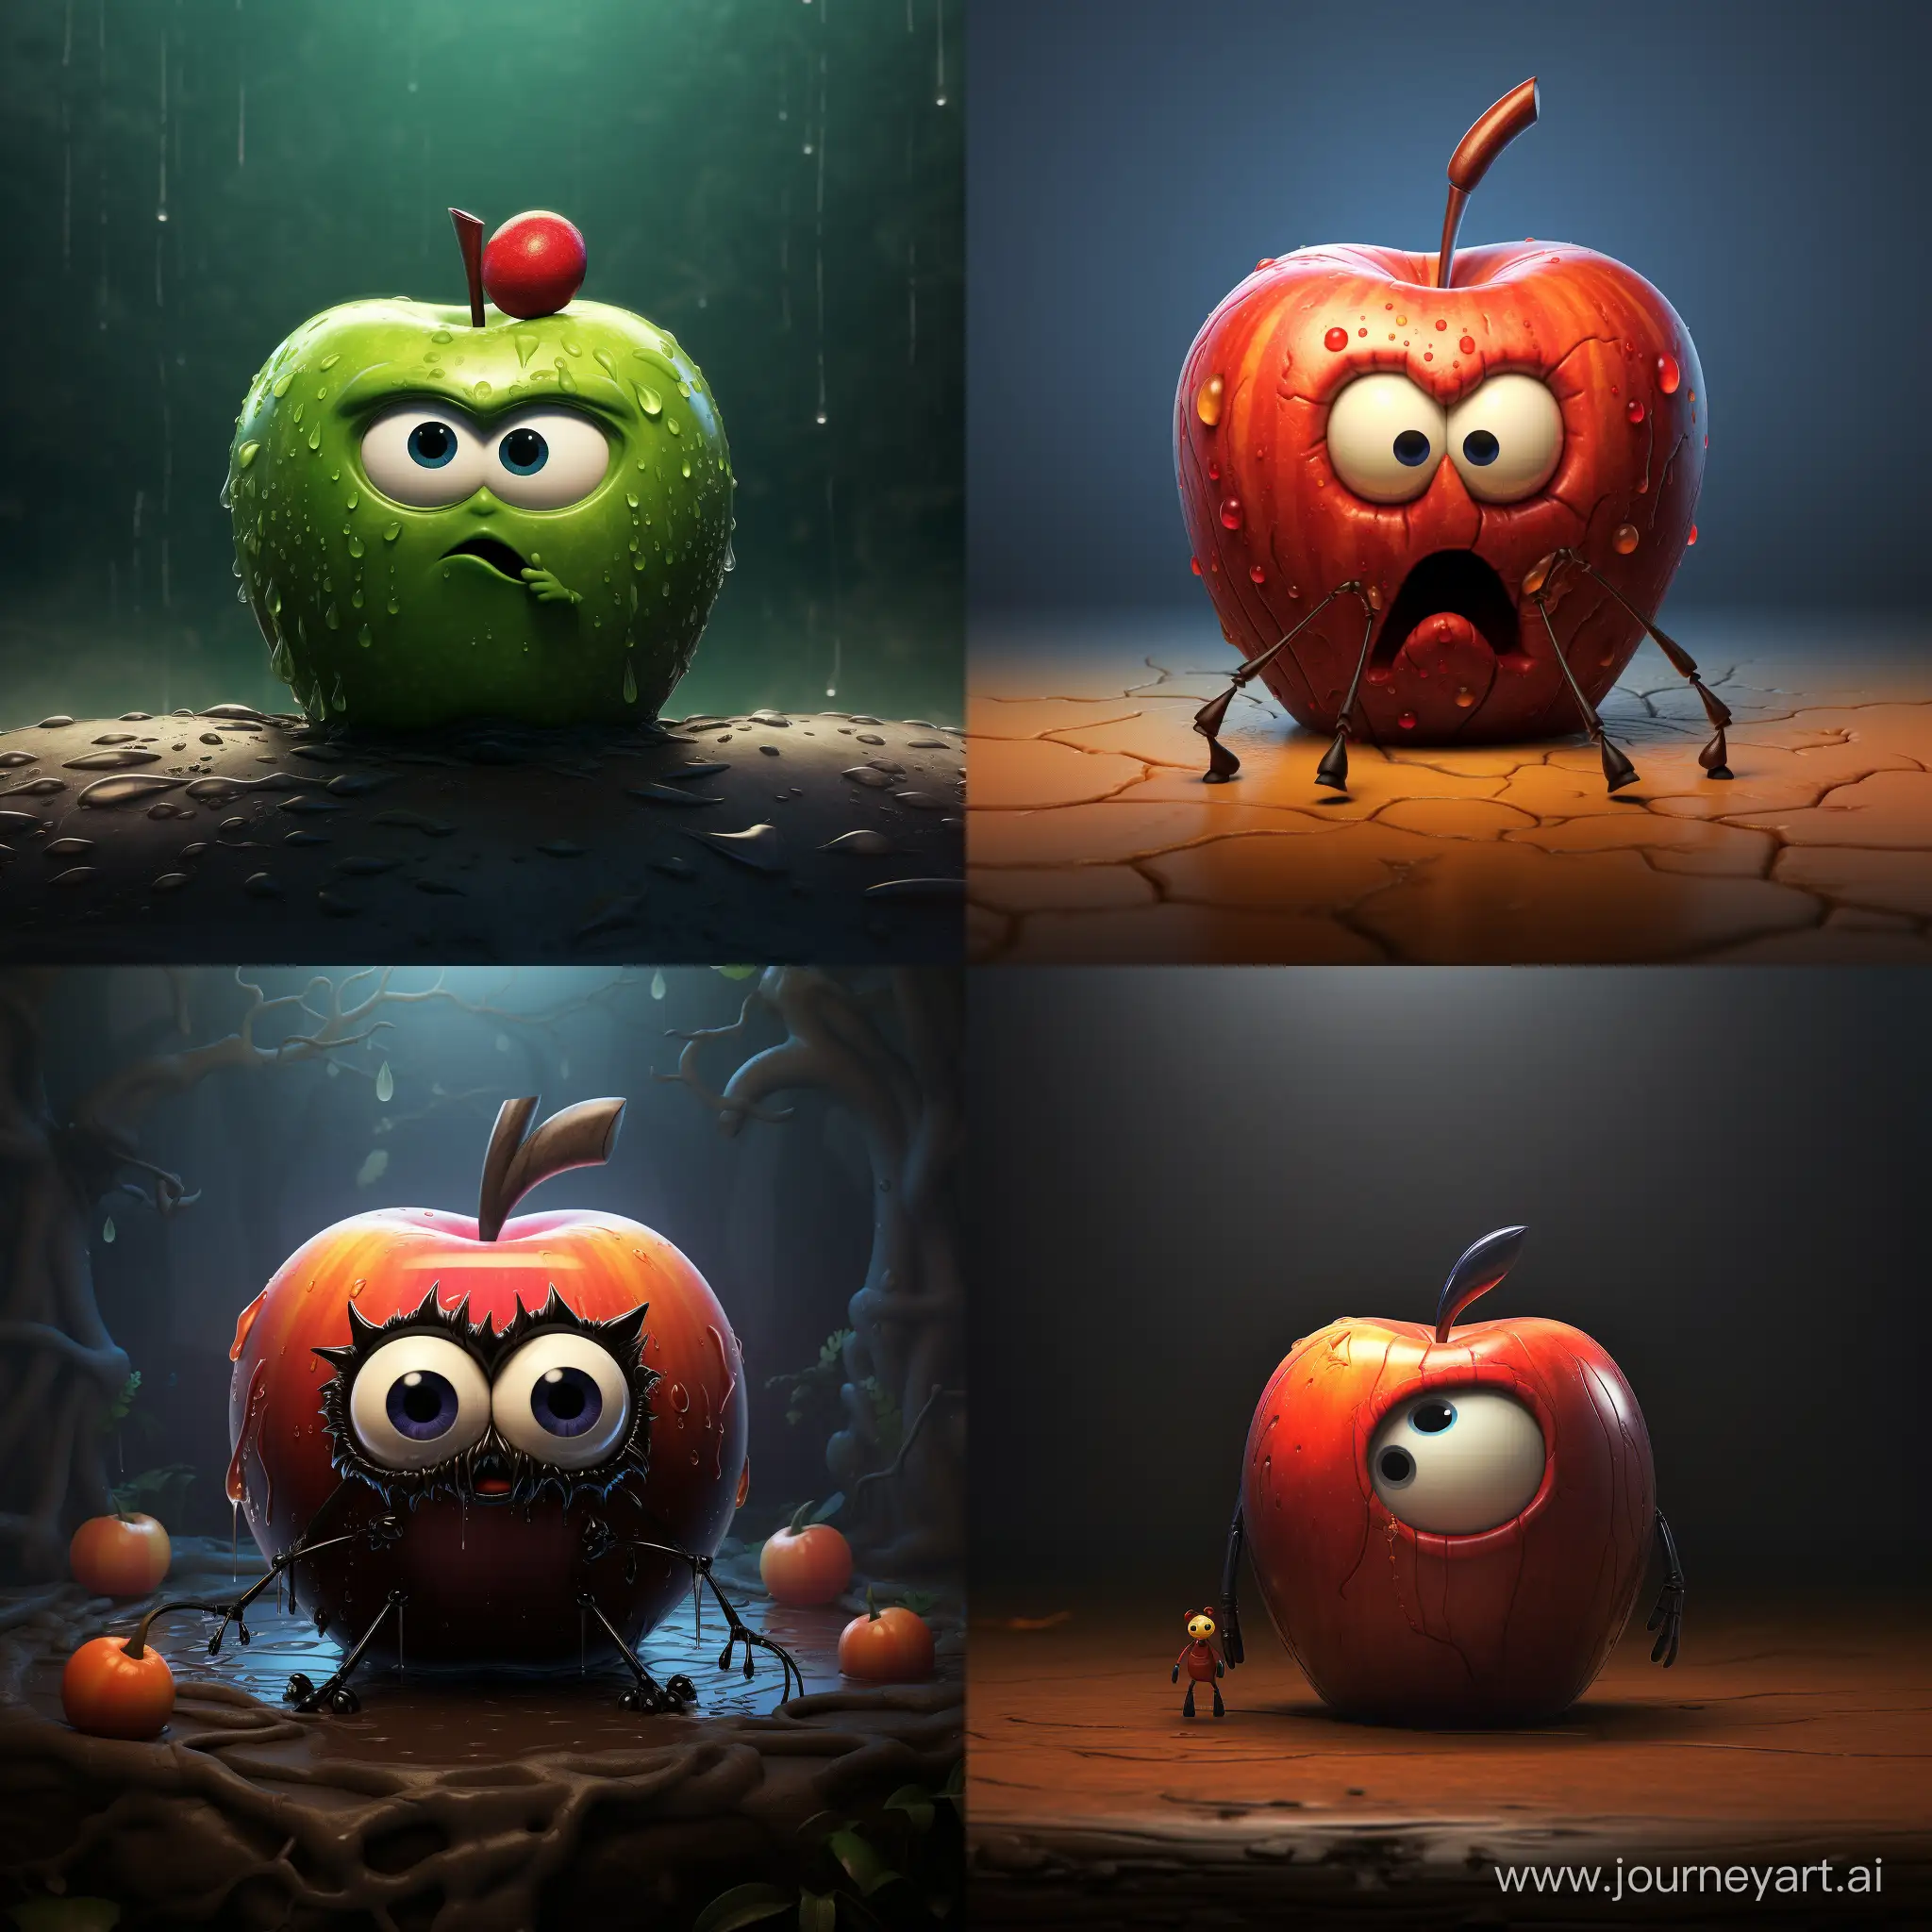 Adorable-PixarStyle-Spider-Perched-on-Juicy-Apple